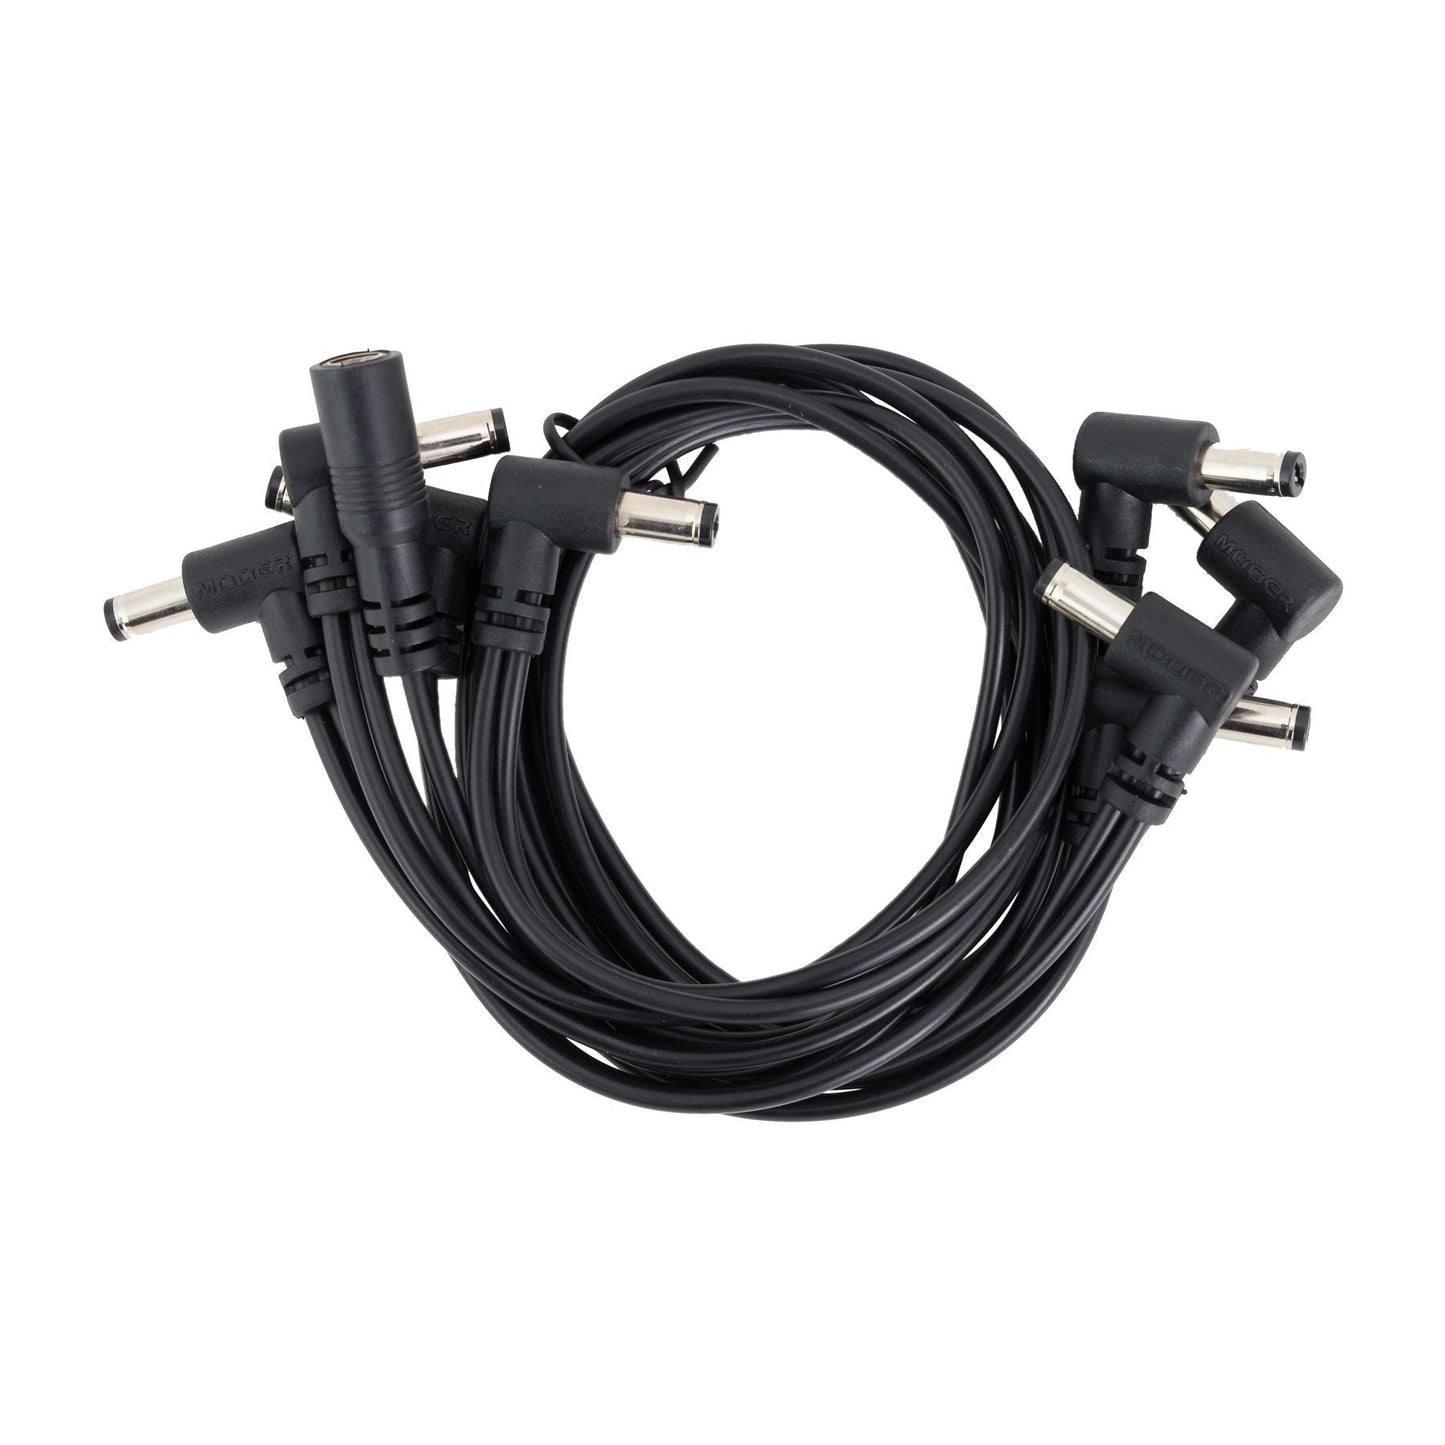 Mooer 8-Plug DC Daisy Chain Pedal Power Cable (Right-Angle Plugs)